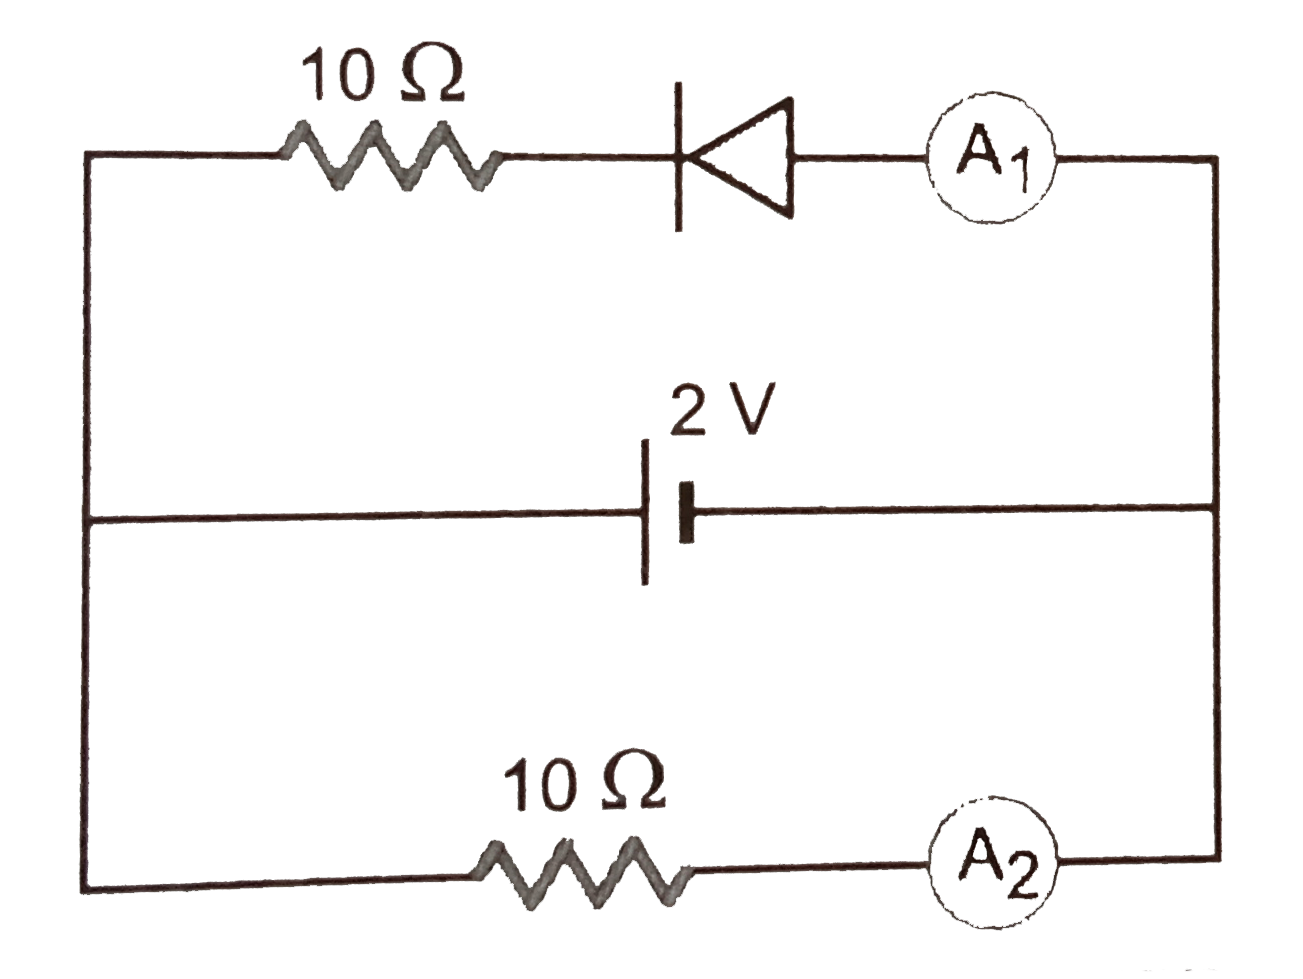 Assuming that the resistance of the meters are negligible, what will be the readings of the ammeters A(1) and A(2) in the circuit shown in Fig.